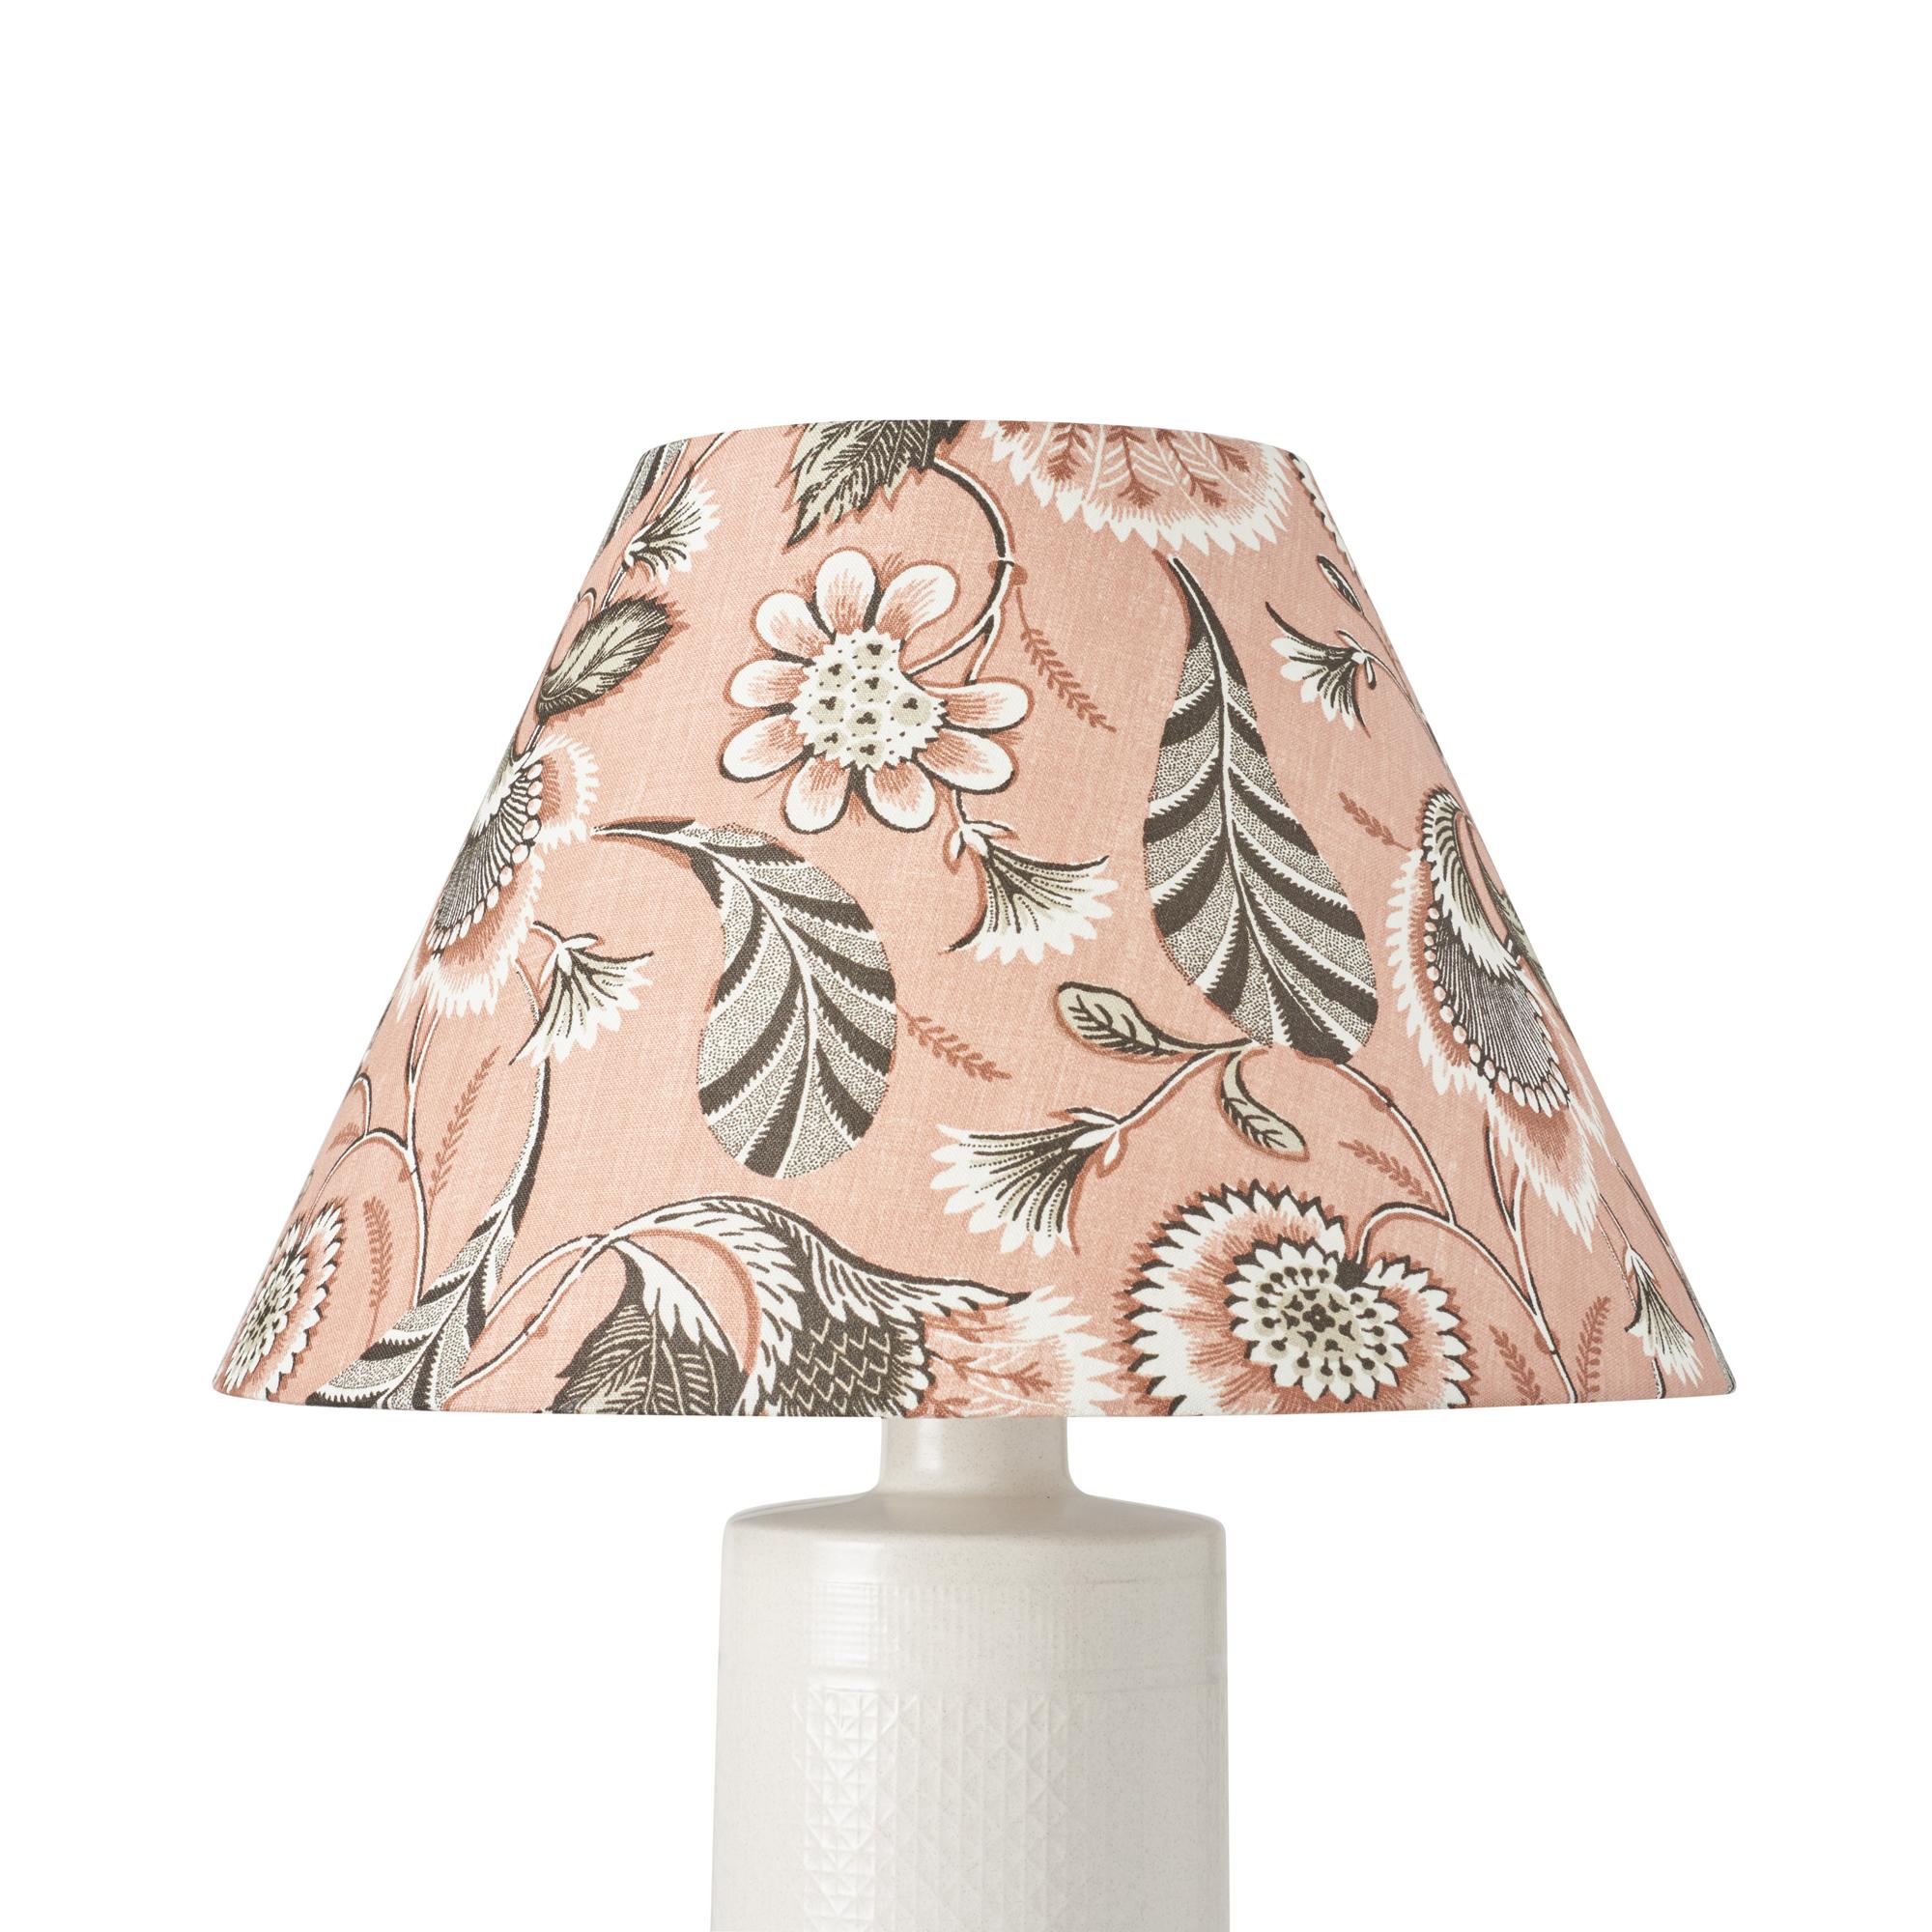 This lampshade features our Ursula pattern in Blush. Ursula is an enchanting combination of crisp, graphic elements and romantic, feathery florals. 8